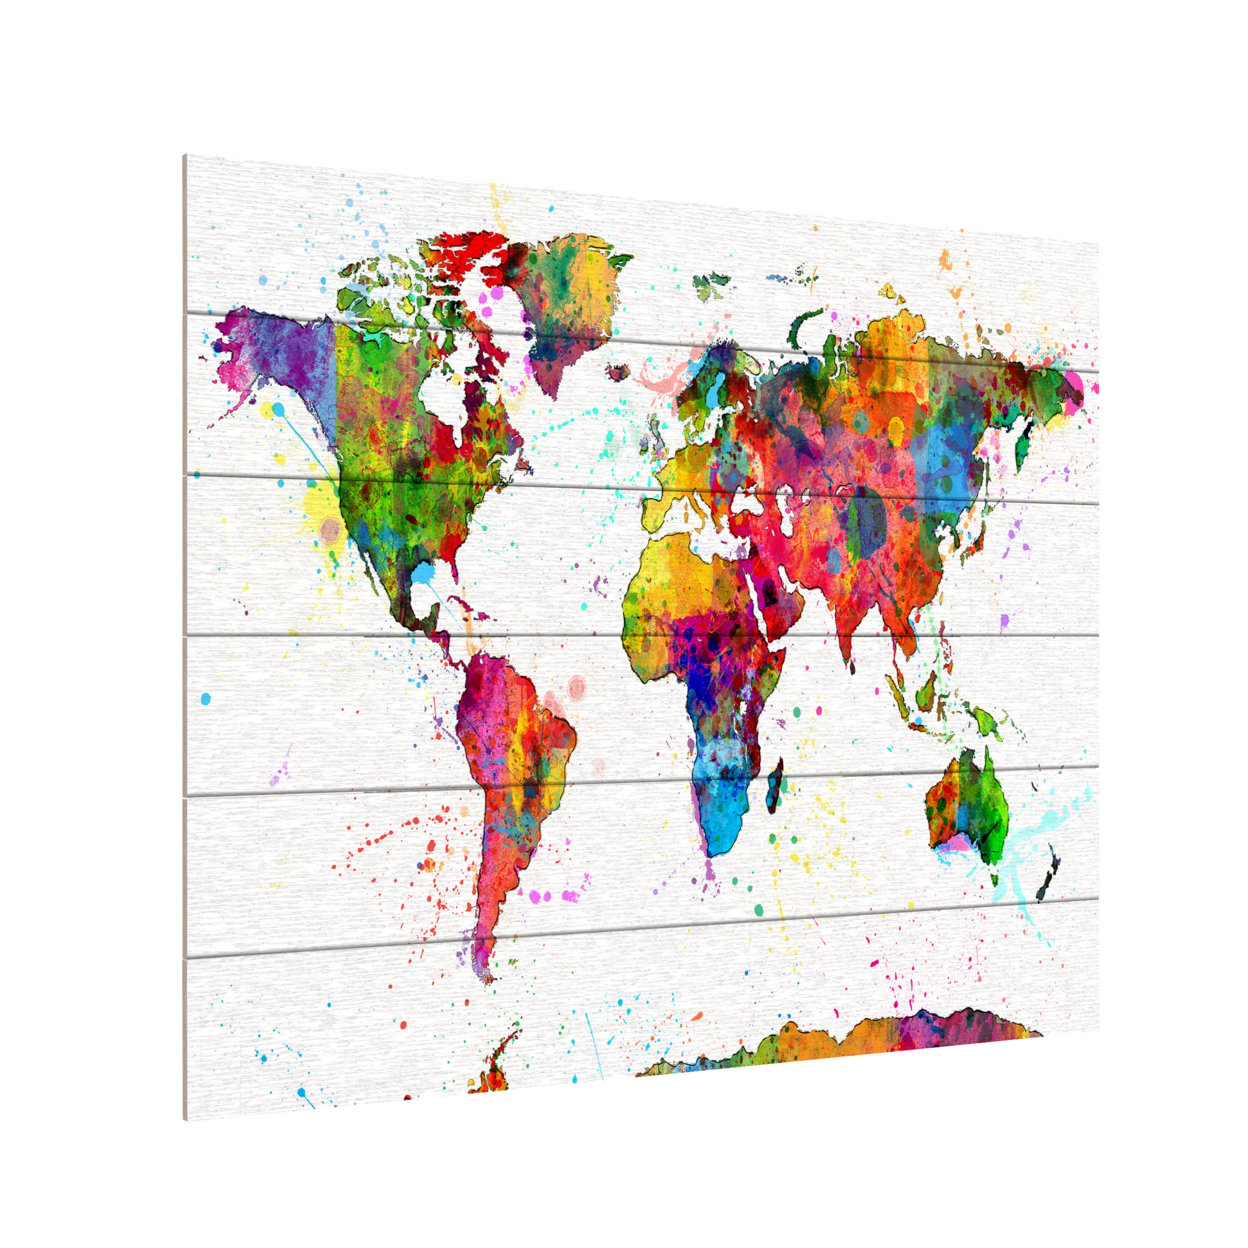 Wooden Slat Art 18 X 22 Inches Titled Map Of The World Watercolor Ready To Hang Home Decor Picture